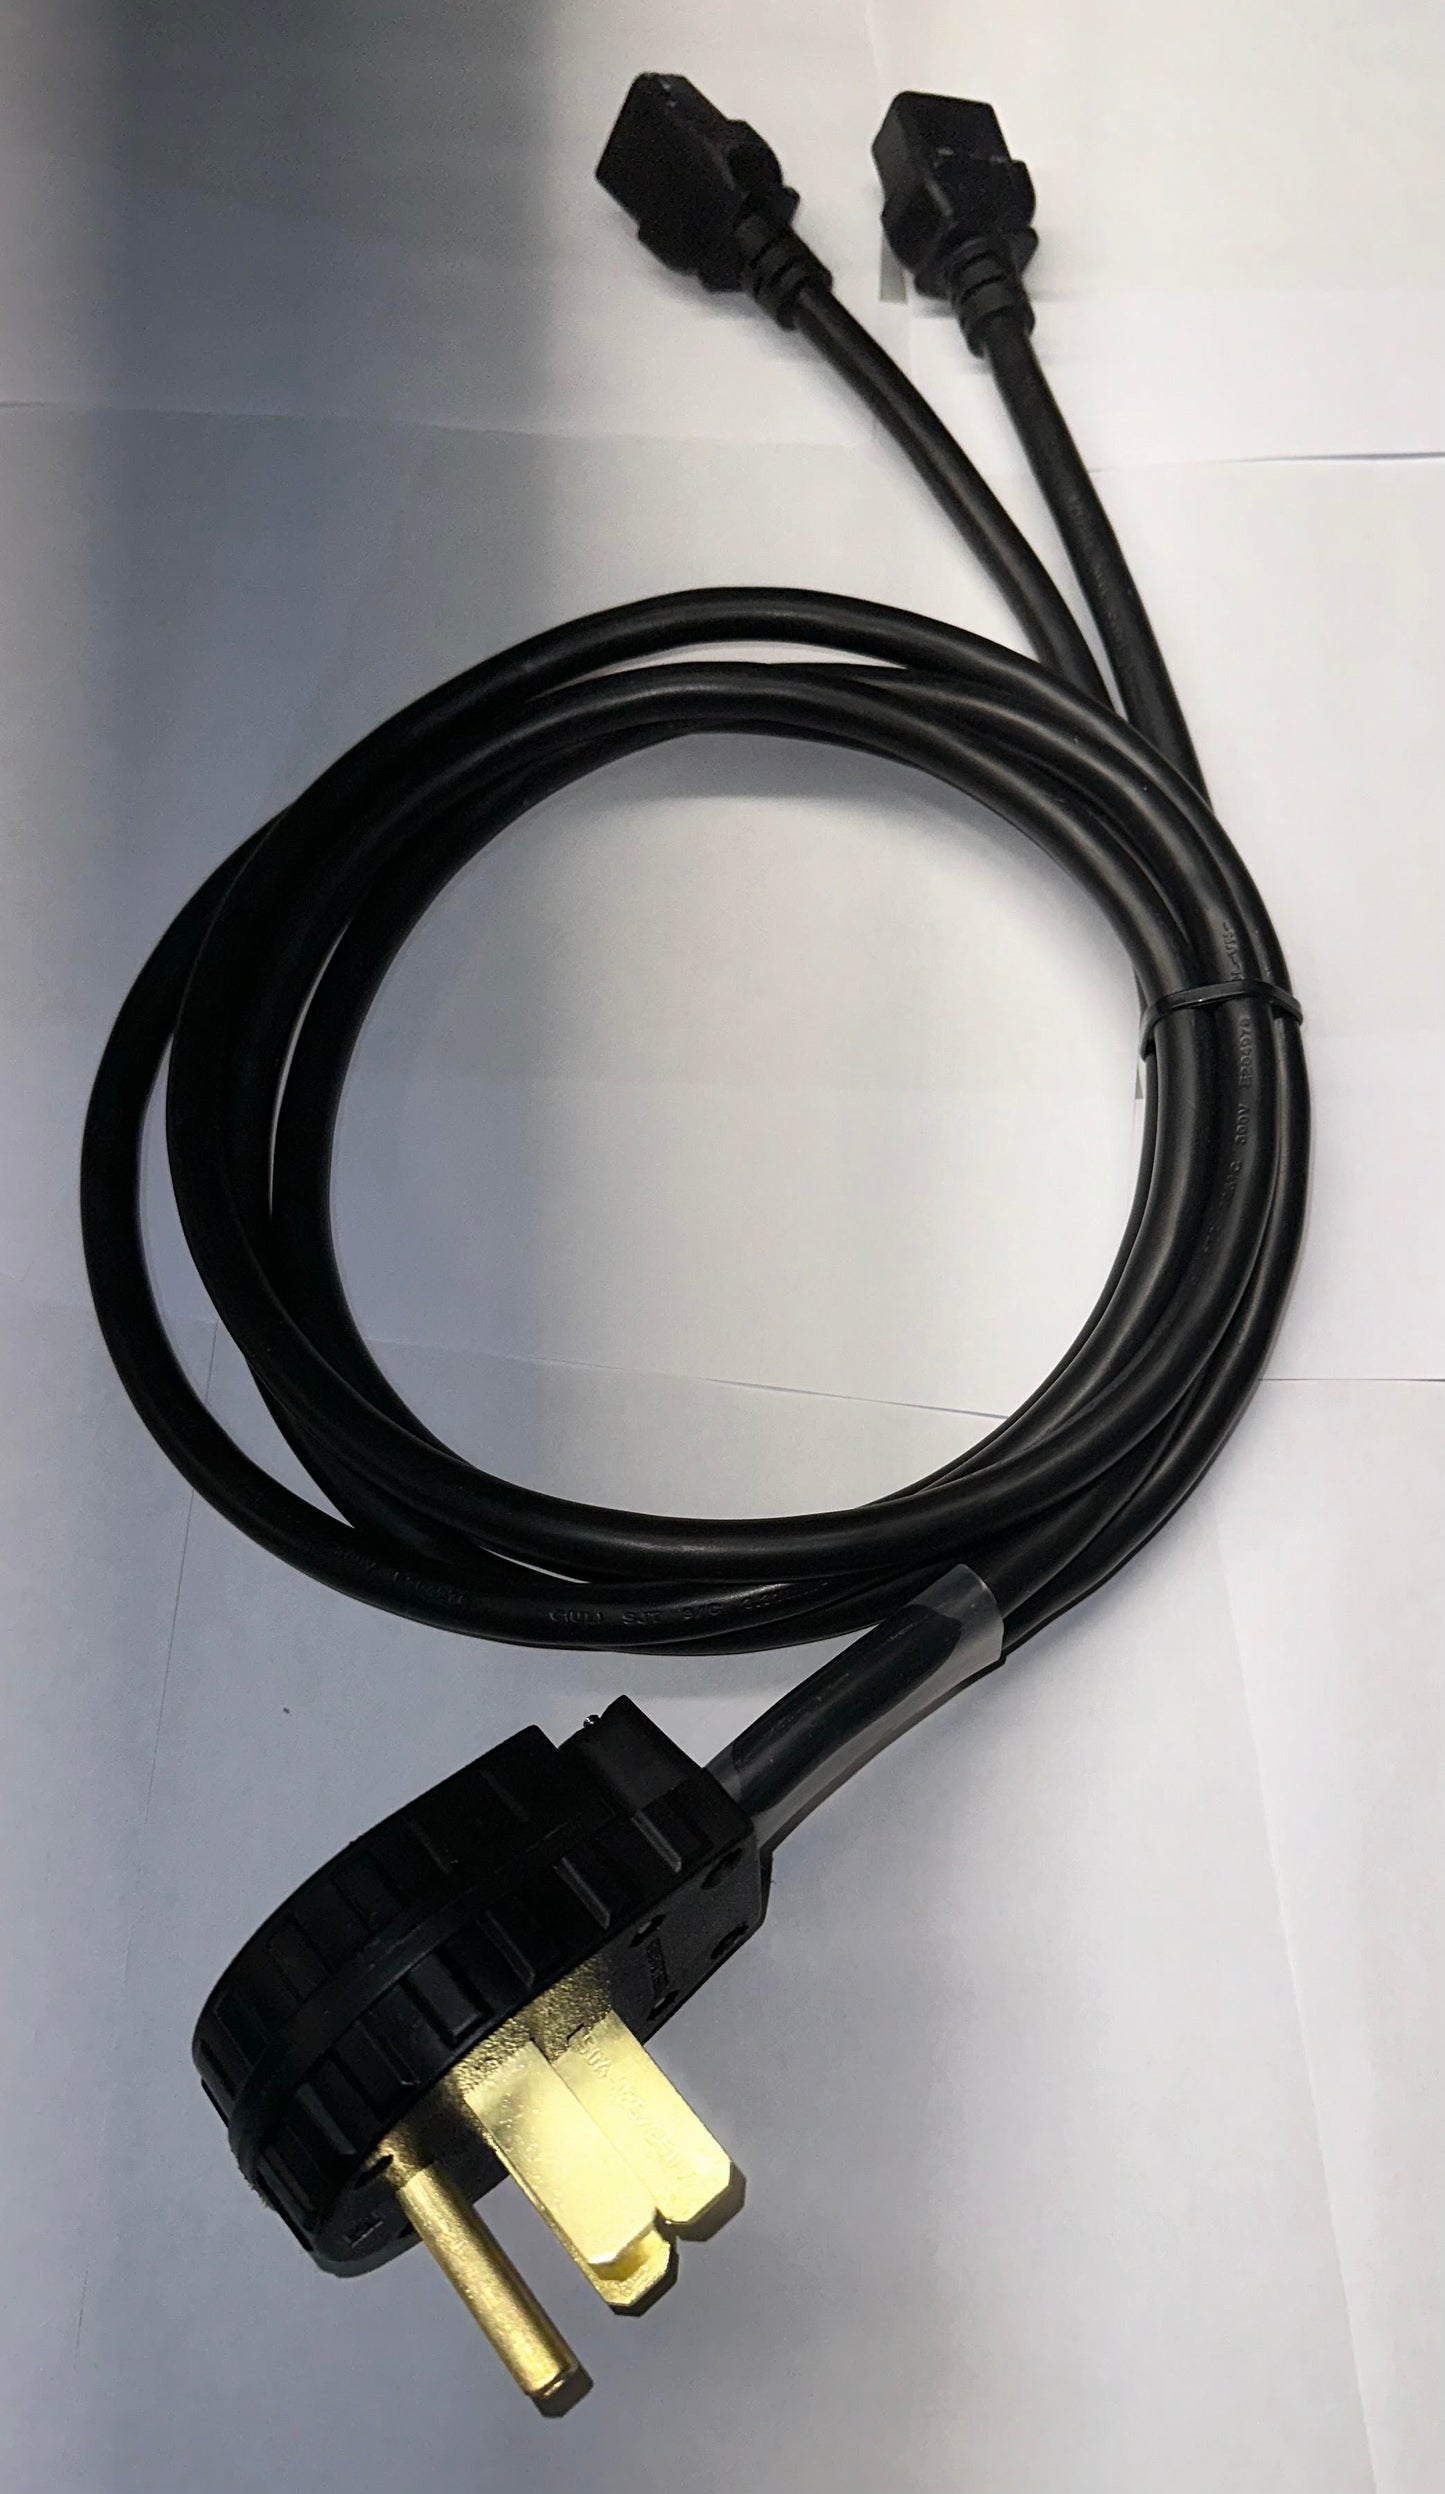 DJI Agras 240 Volt Charger Cable 6ft. - (14-50P)